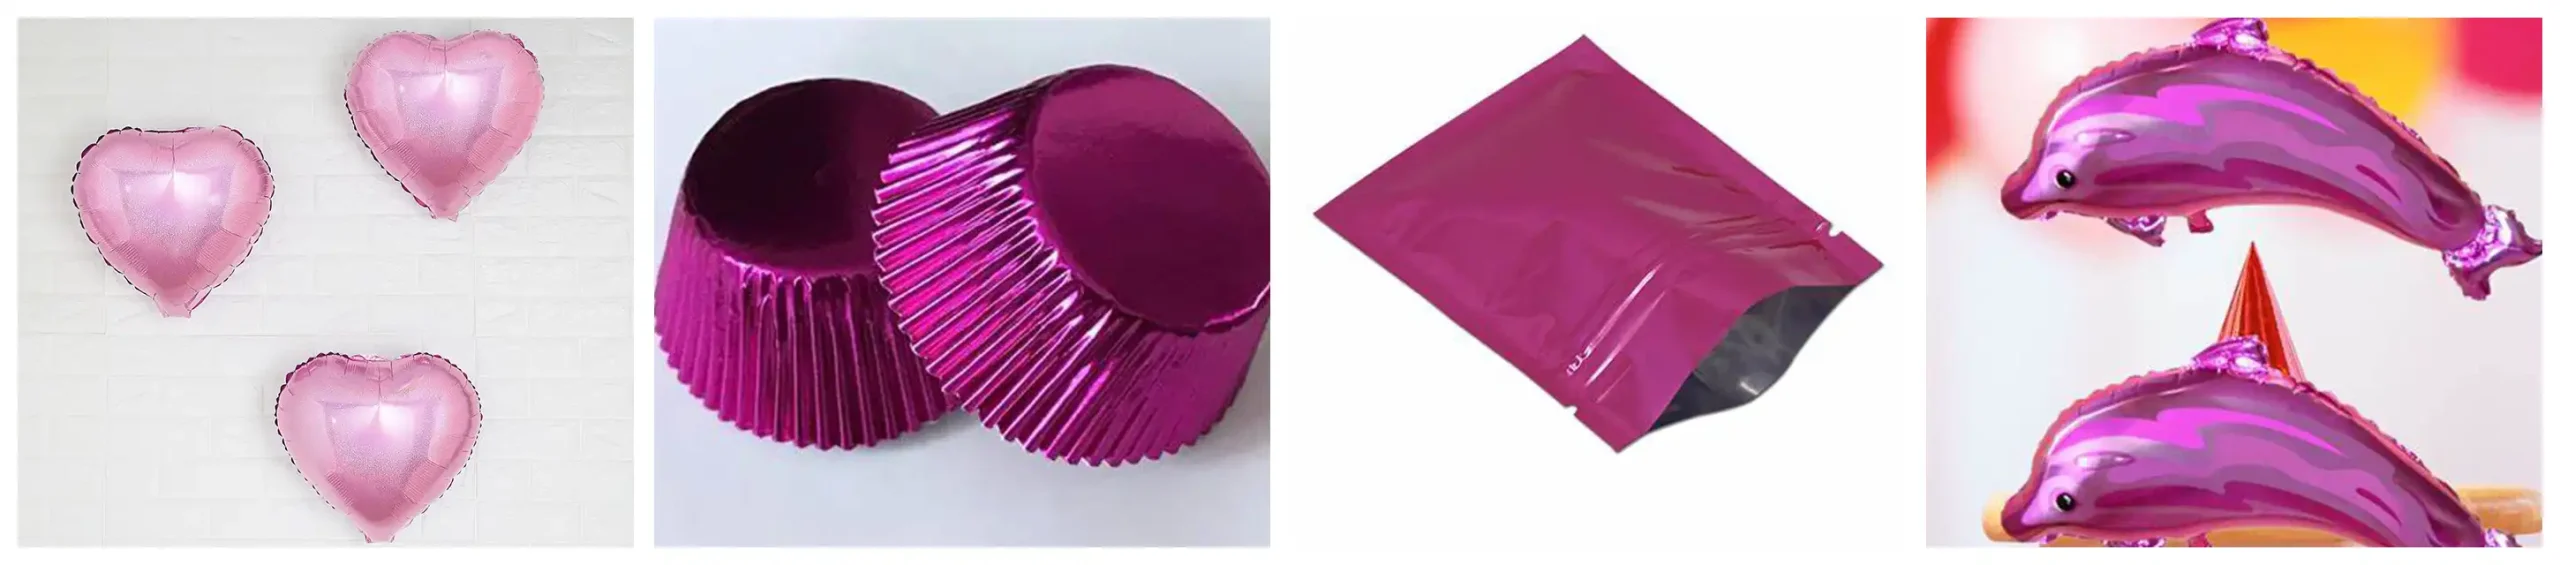 pink aluminum foil for packaging, decorations, centerpieces, and party favors